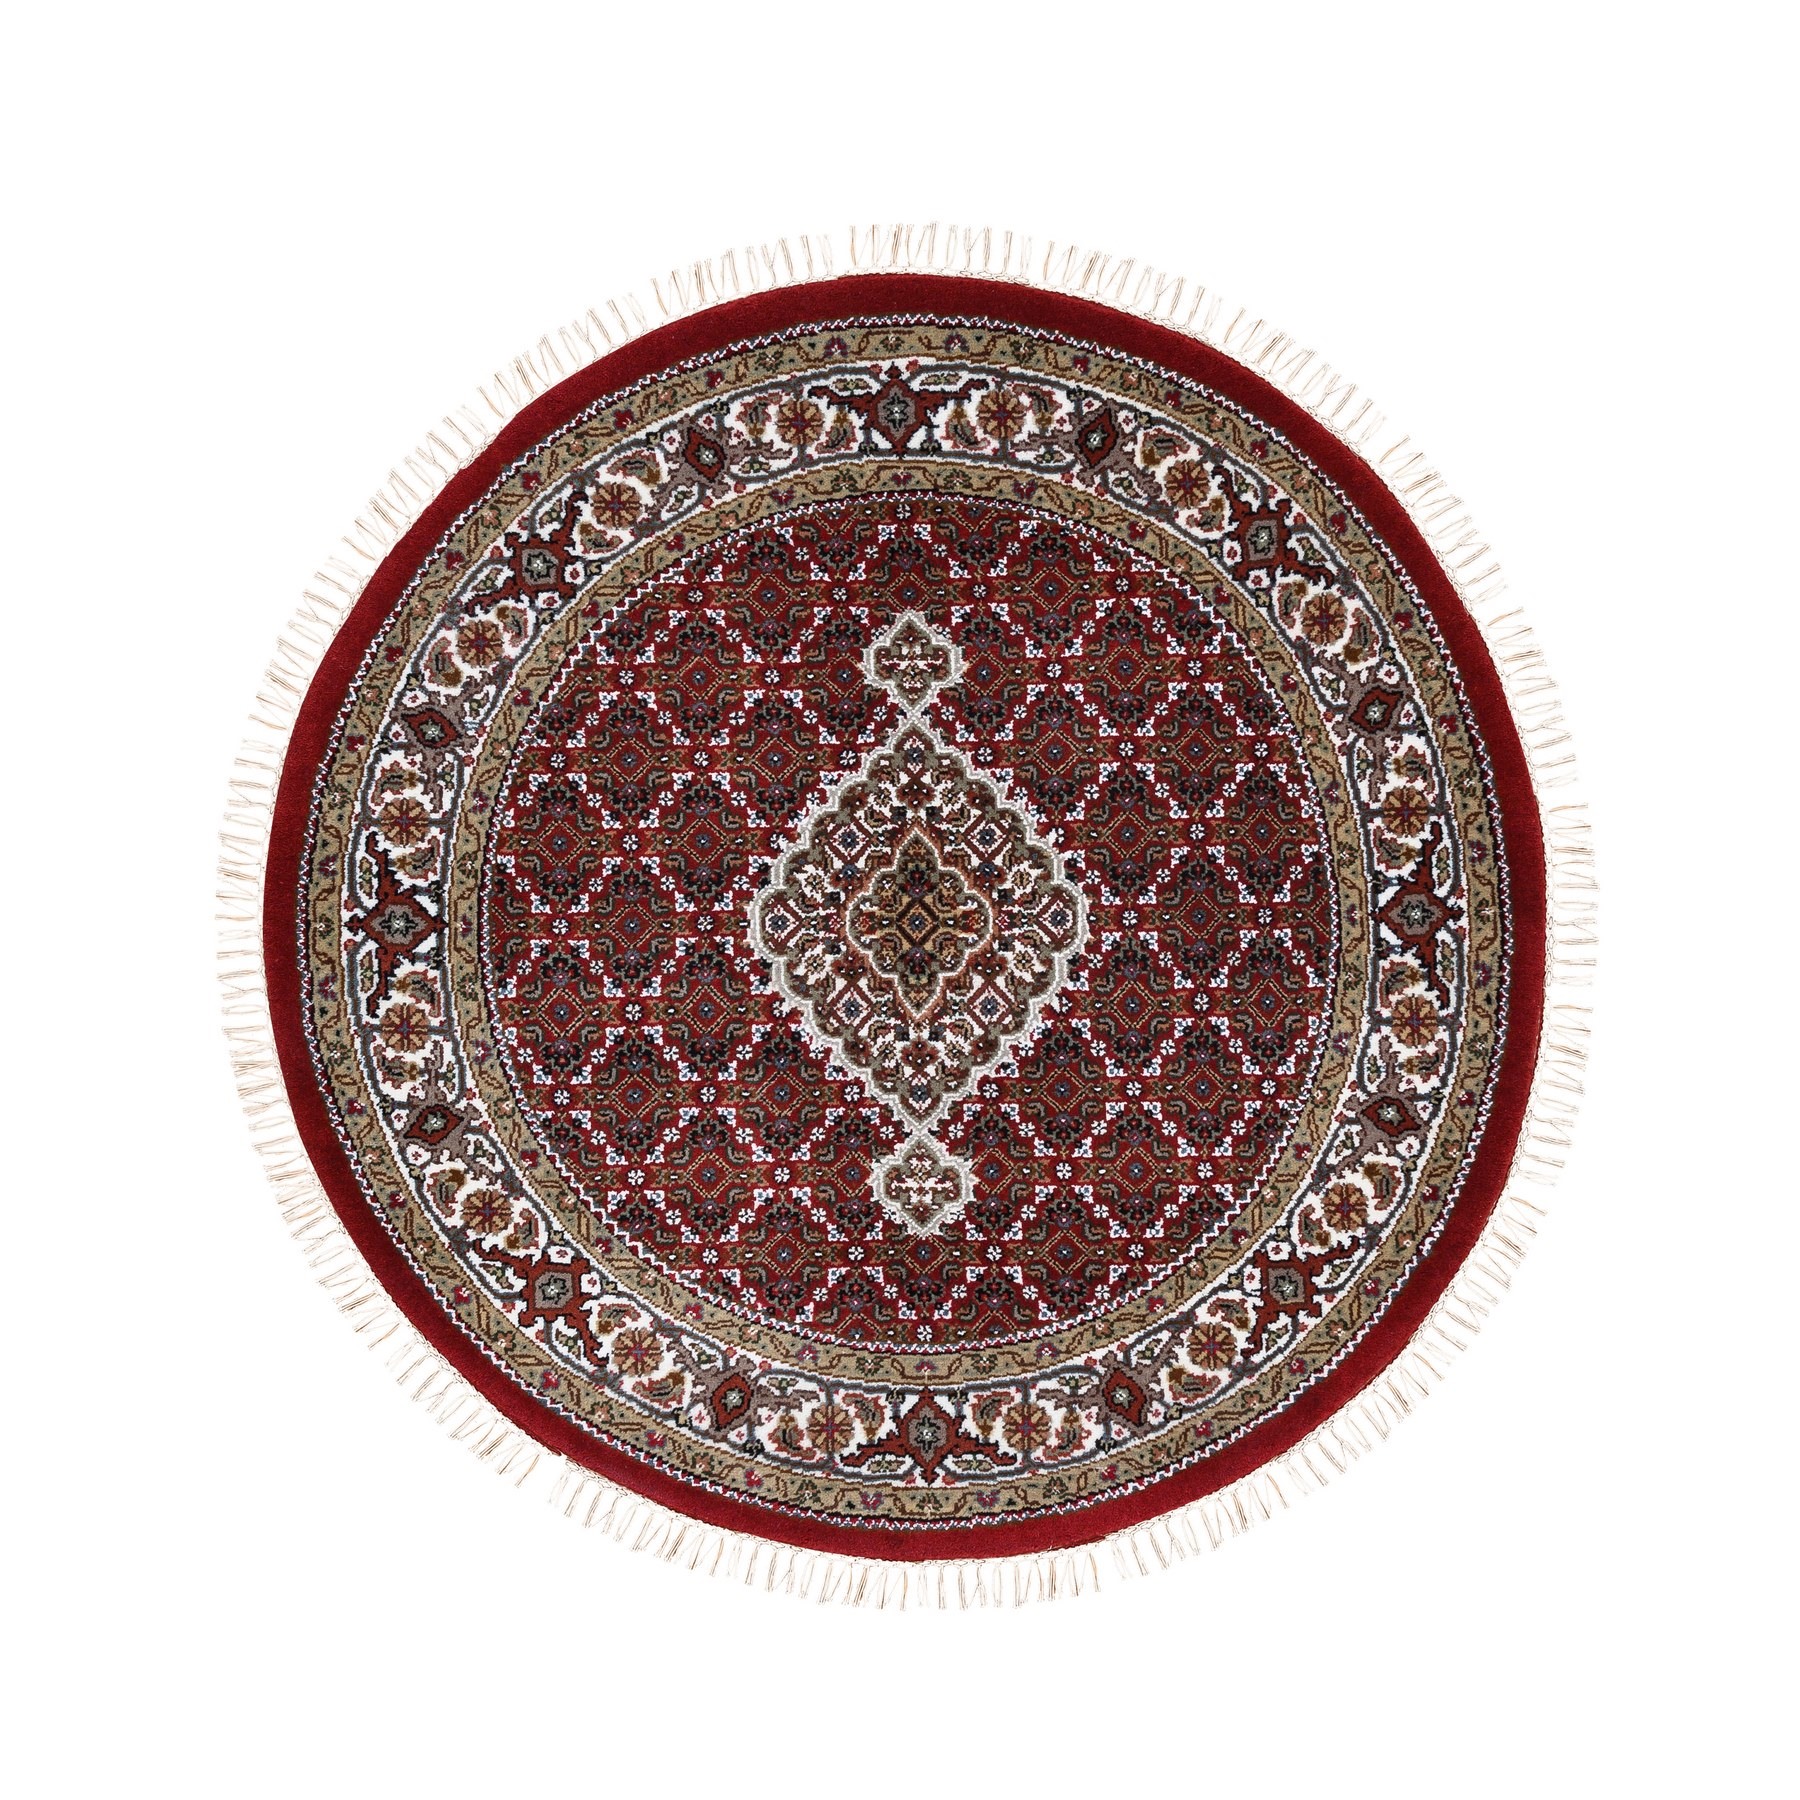 Pirniakan Collection Hand Knotted Red Rug No: 1124878